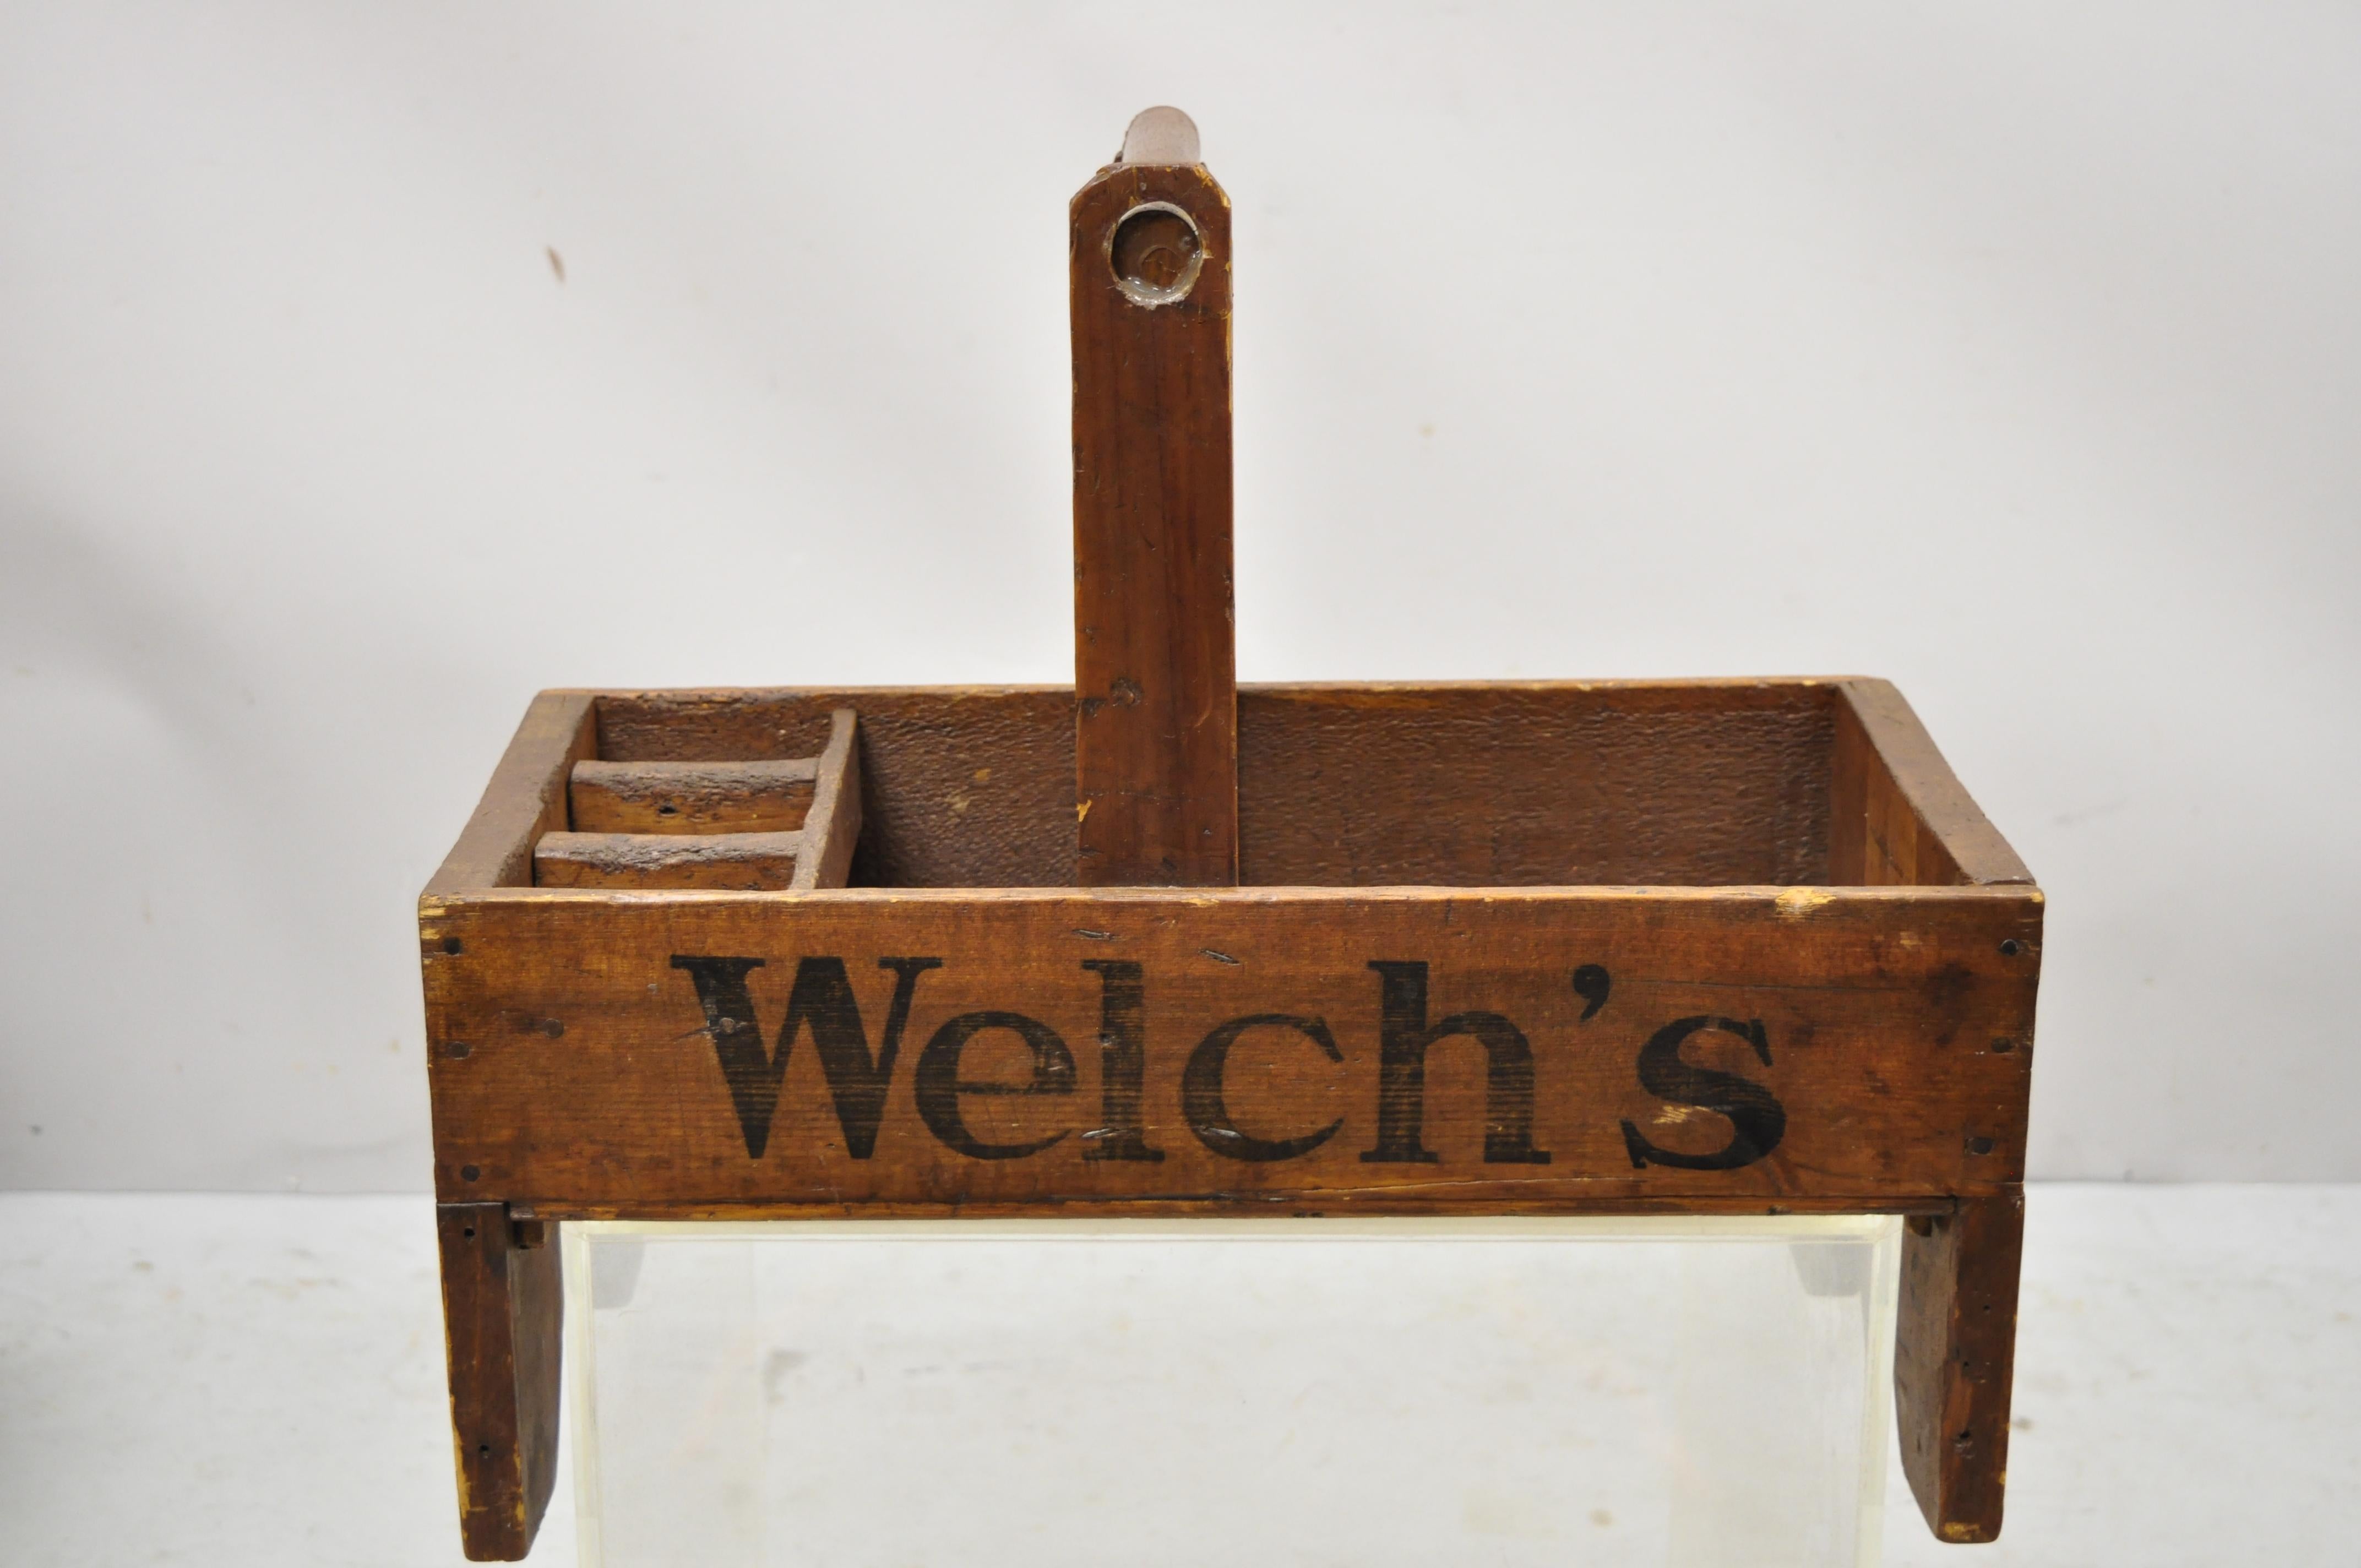 Antique Larkin & Son Welch's grape juice advertisement wooden work toolbox caddy. Item features remarkable patina, Welch's grape juice advertisement to sides, wooden handle, solid wood construction, very nice antique item. Original Larkin & Son, Co.